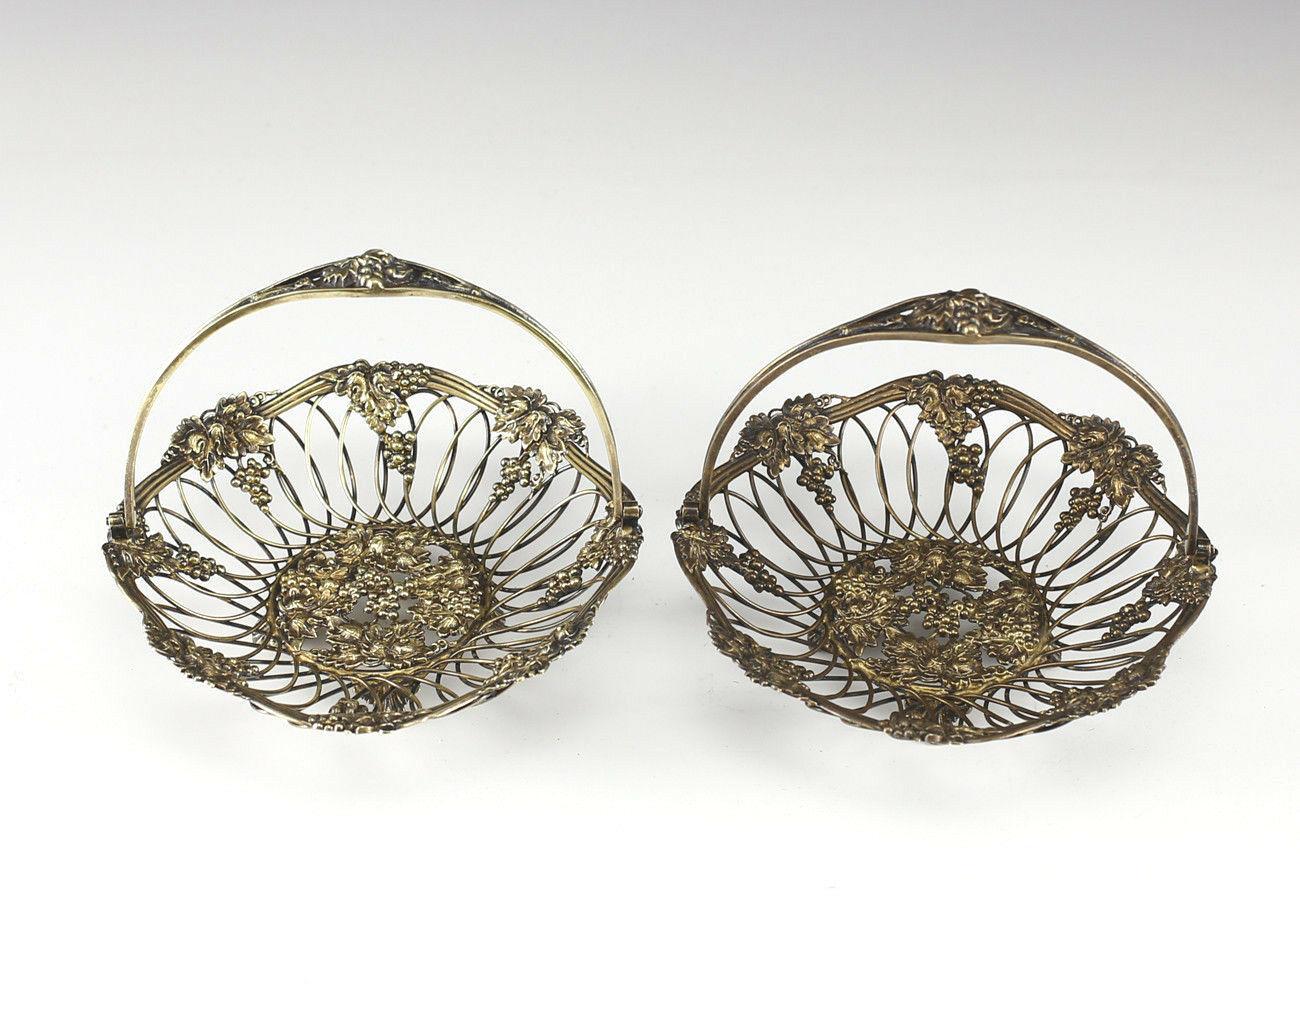 Pair of Gilt Sterling Silver Reticulated Swing Handle Footed Baskets by Howard & Co. Grape and leaf motif. C1920

Additional information:
Composition: Sterling Silver 
Maker: Howard & Co.
Type: Baskets 
Age: 1900-1940
Dimension: 6